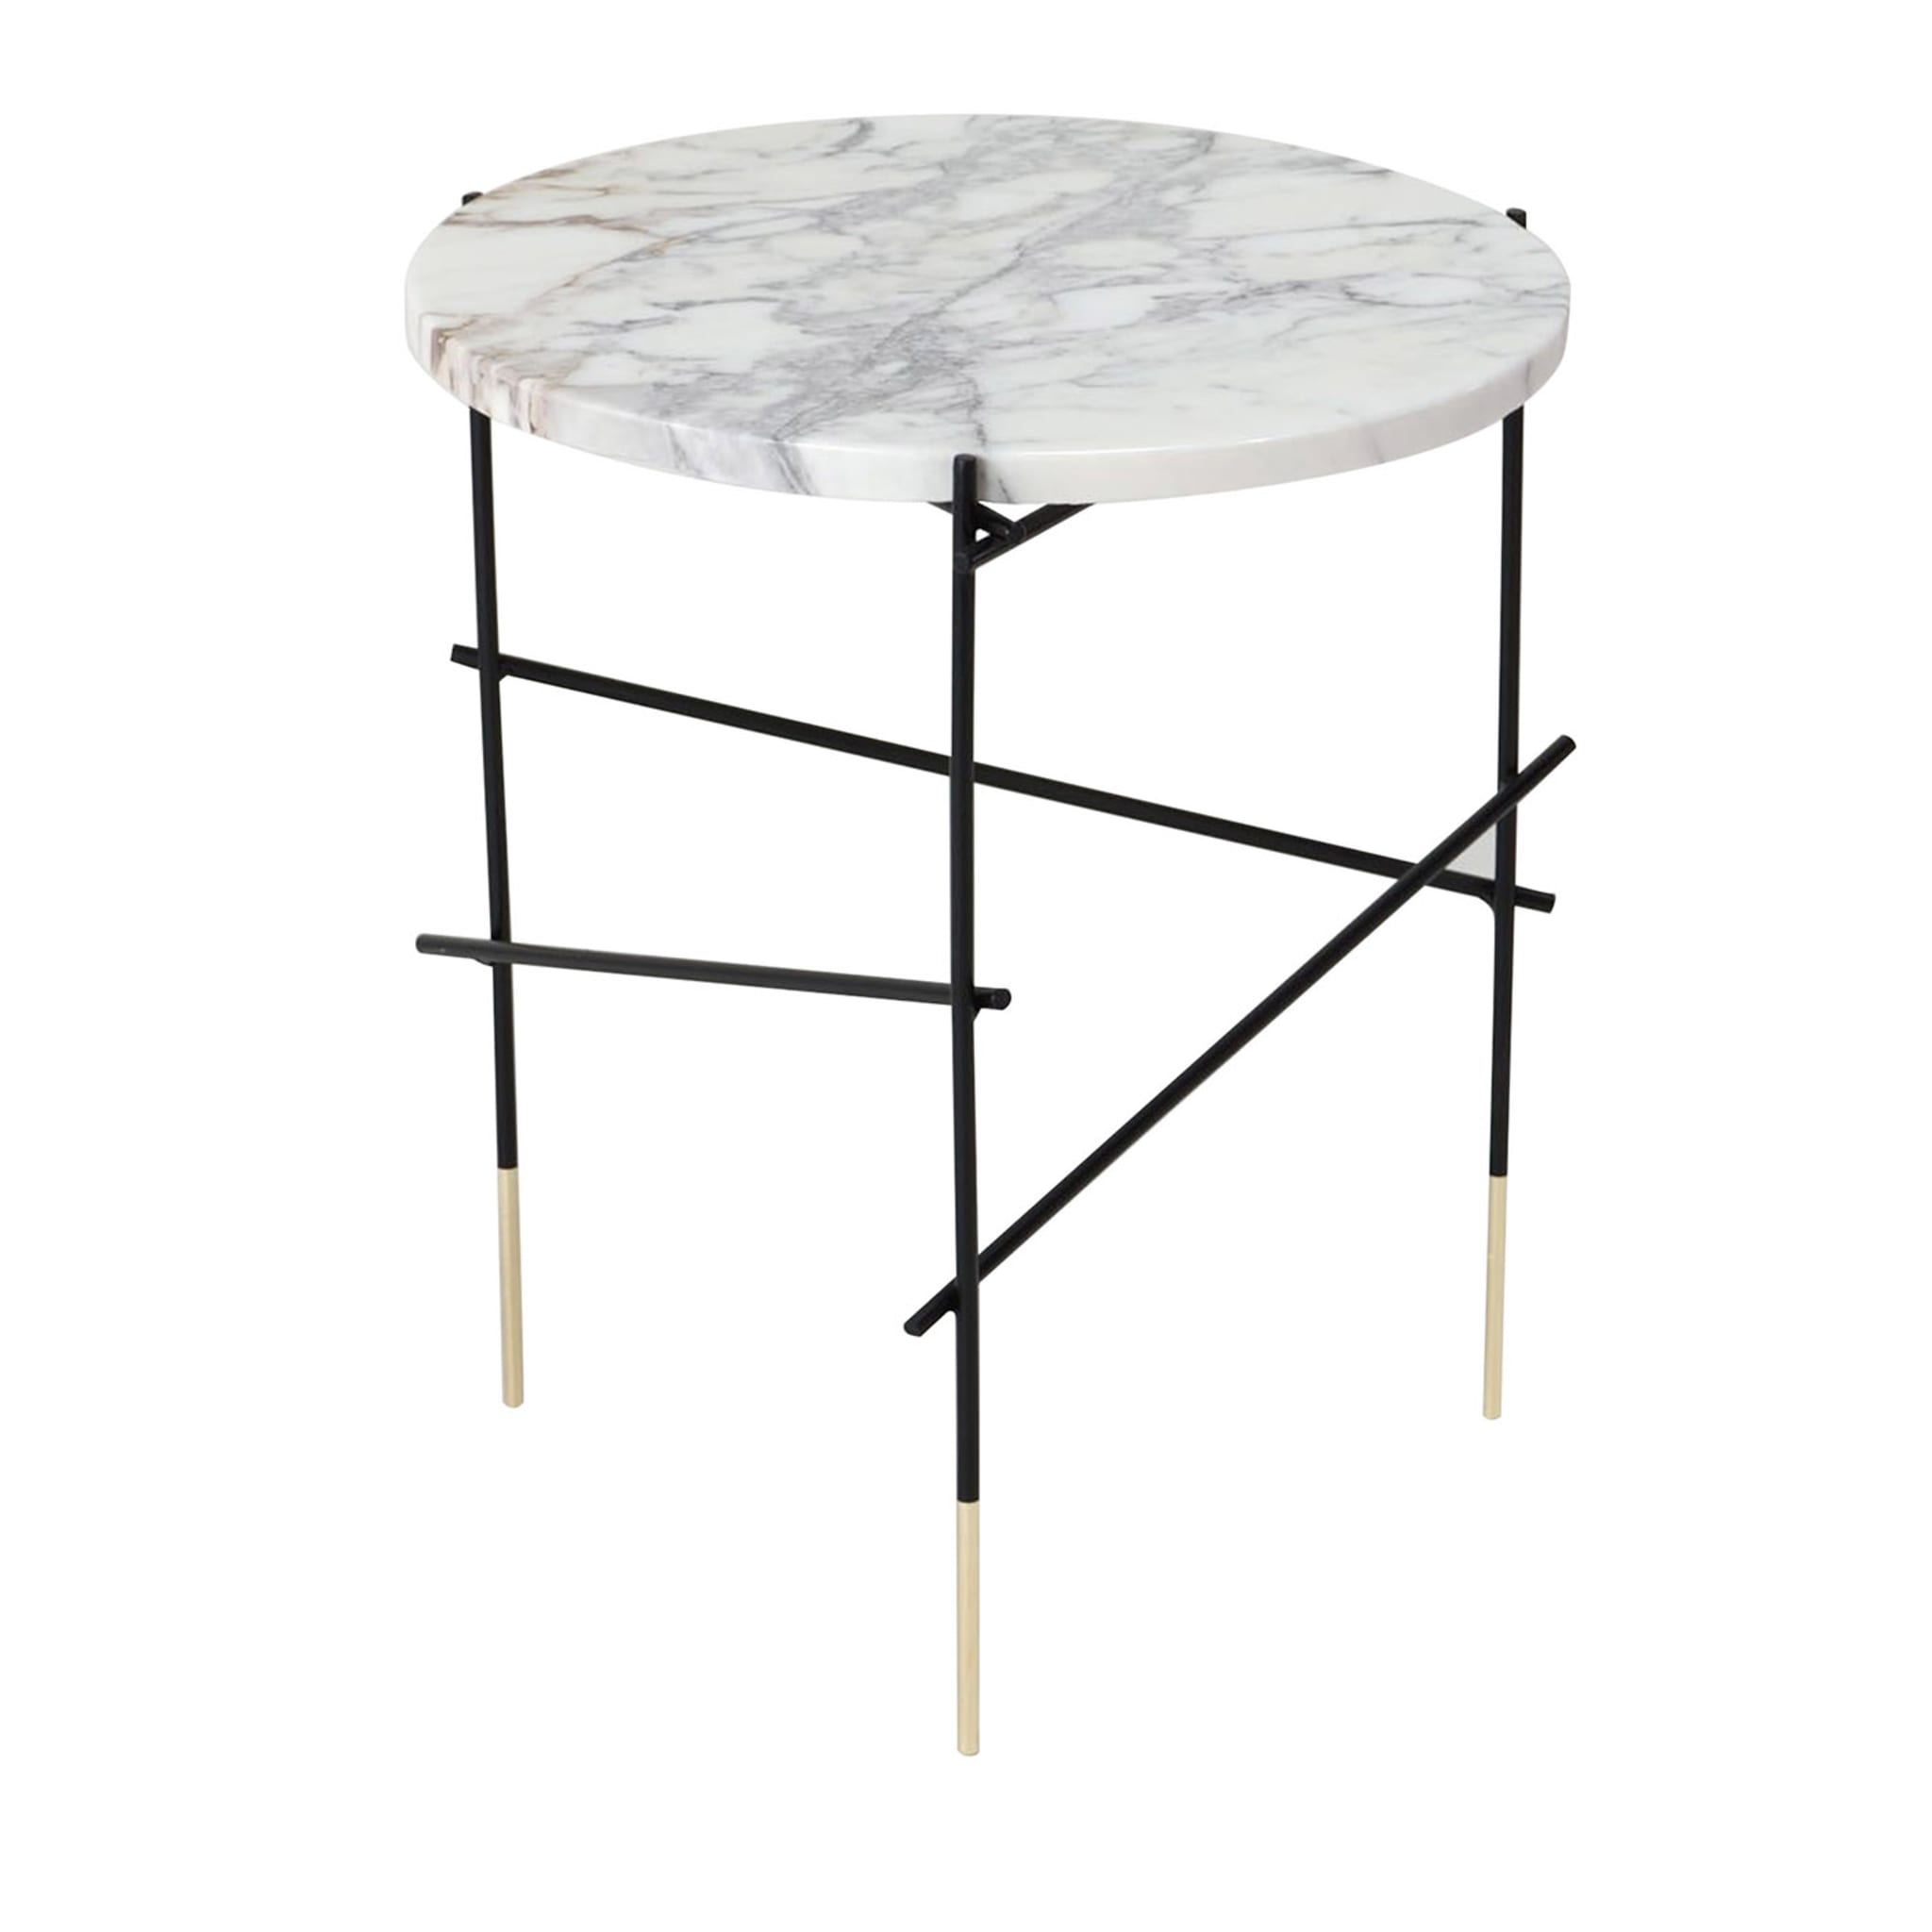 StiltS Arabescato Side Table - Main view